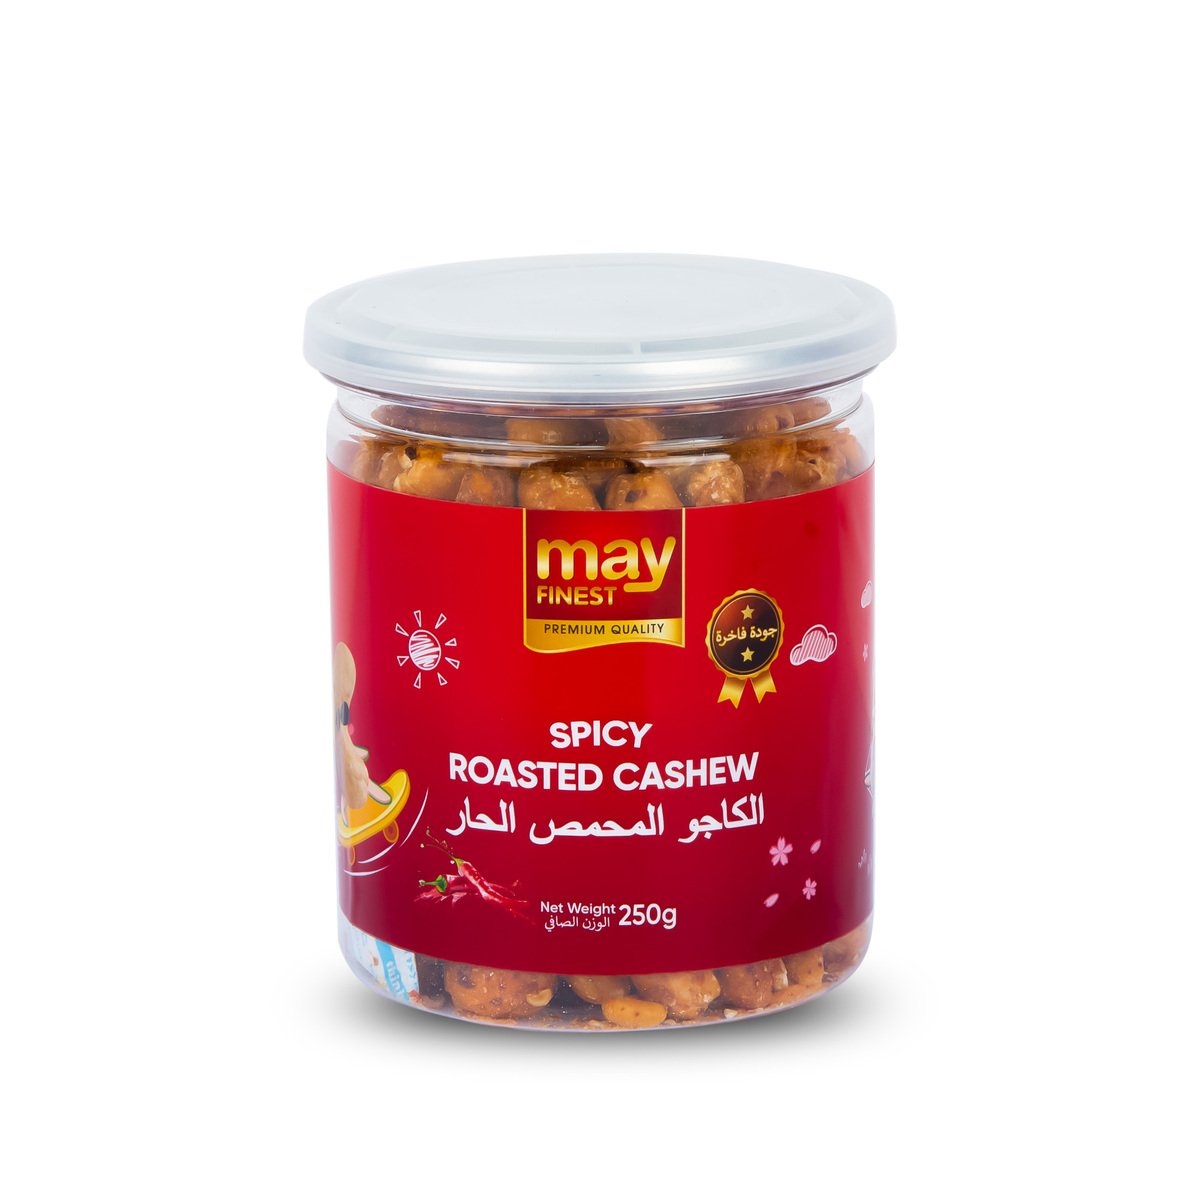 May Finest Spicy Roasted Cashew 250 g